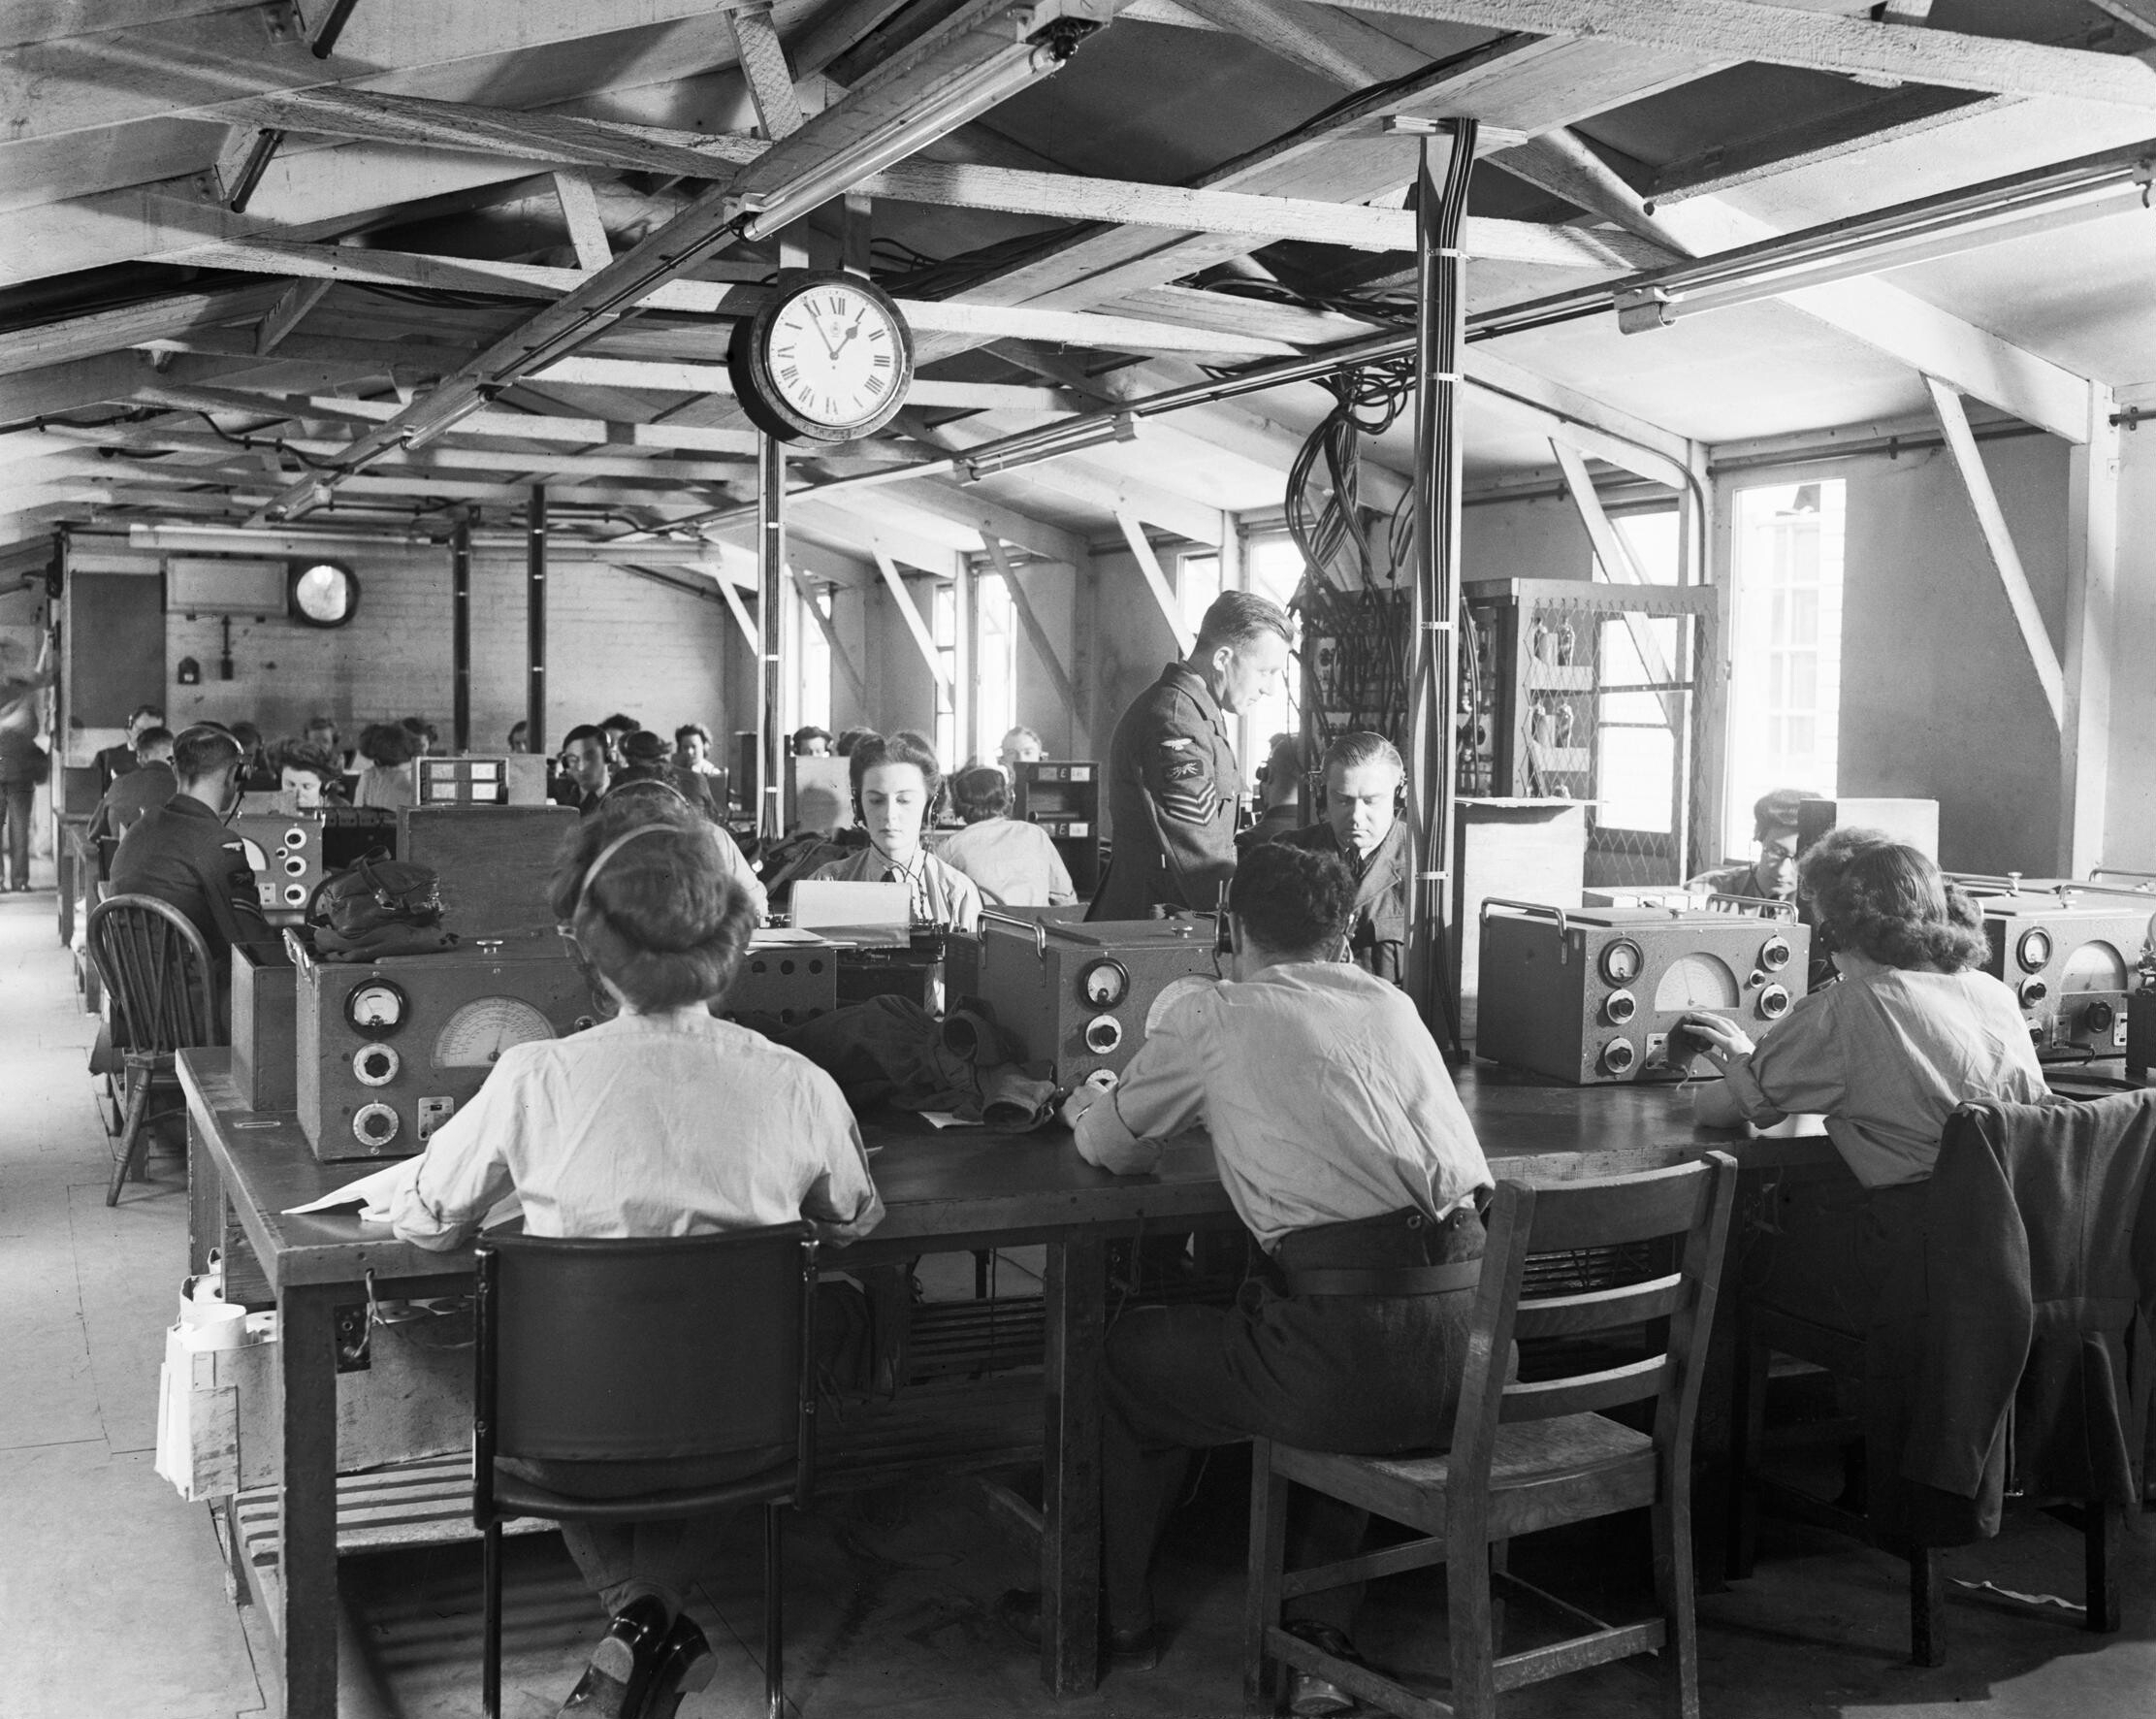 WAAF and RAF radio operators recording meteorological reports from aircraft and ships, Central Forecasting Station, Dunstable, Bedfordshire, England, United Kingdom, 1940s